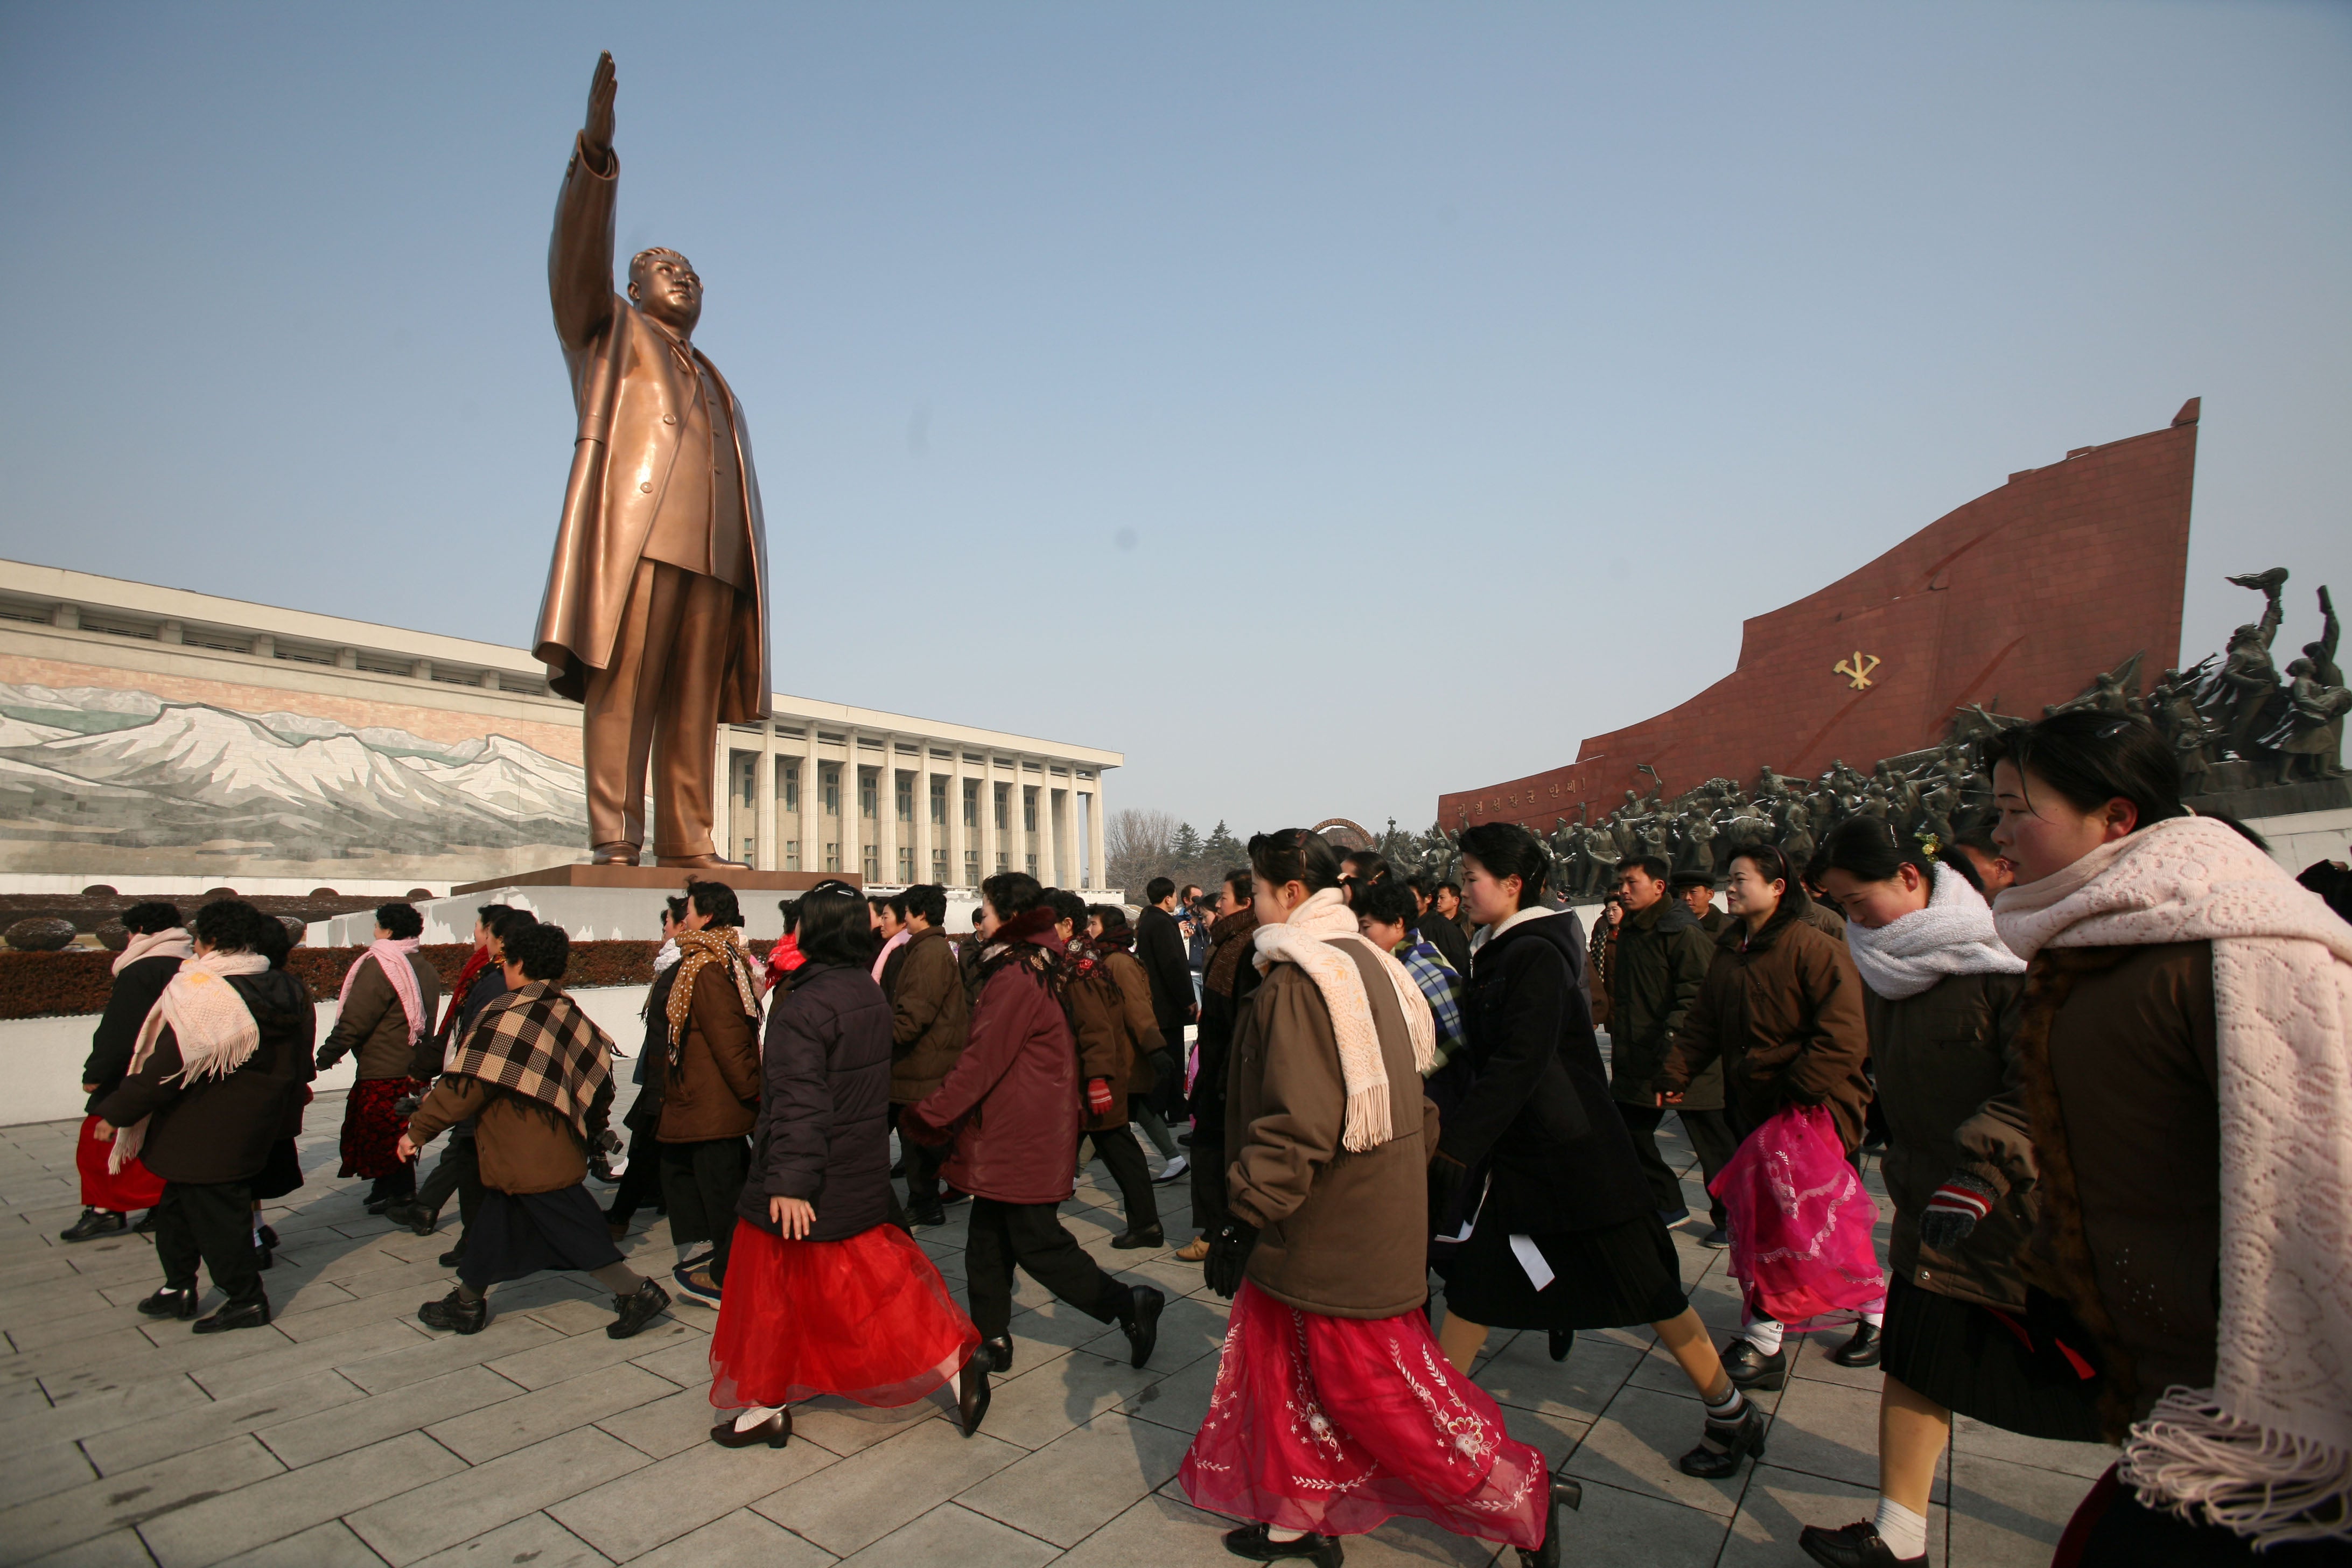 North Koreans visit a monument for Kim Il Sung in Pyongyang, North Korea on Tuesday, Feb. 26, 2008.